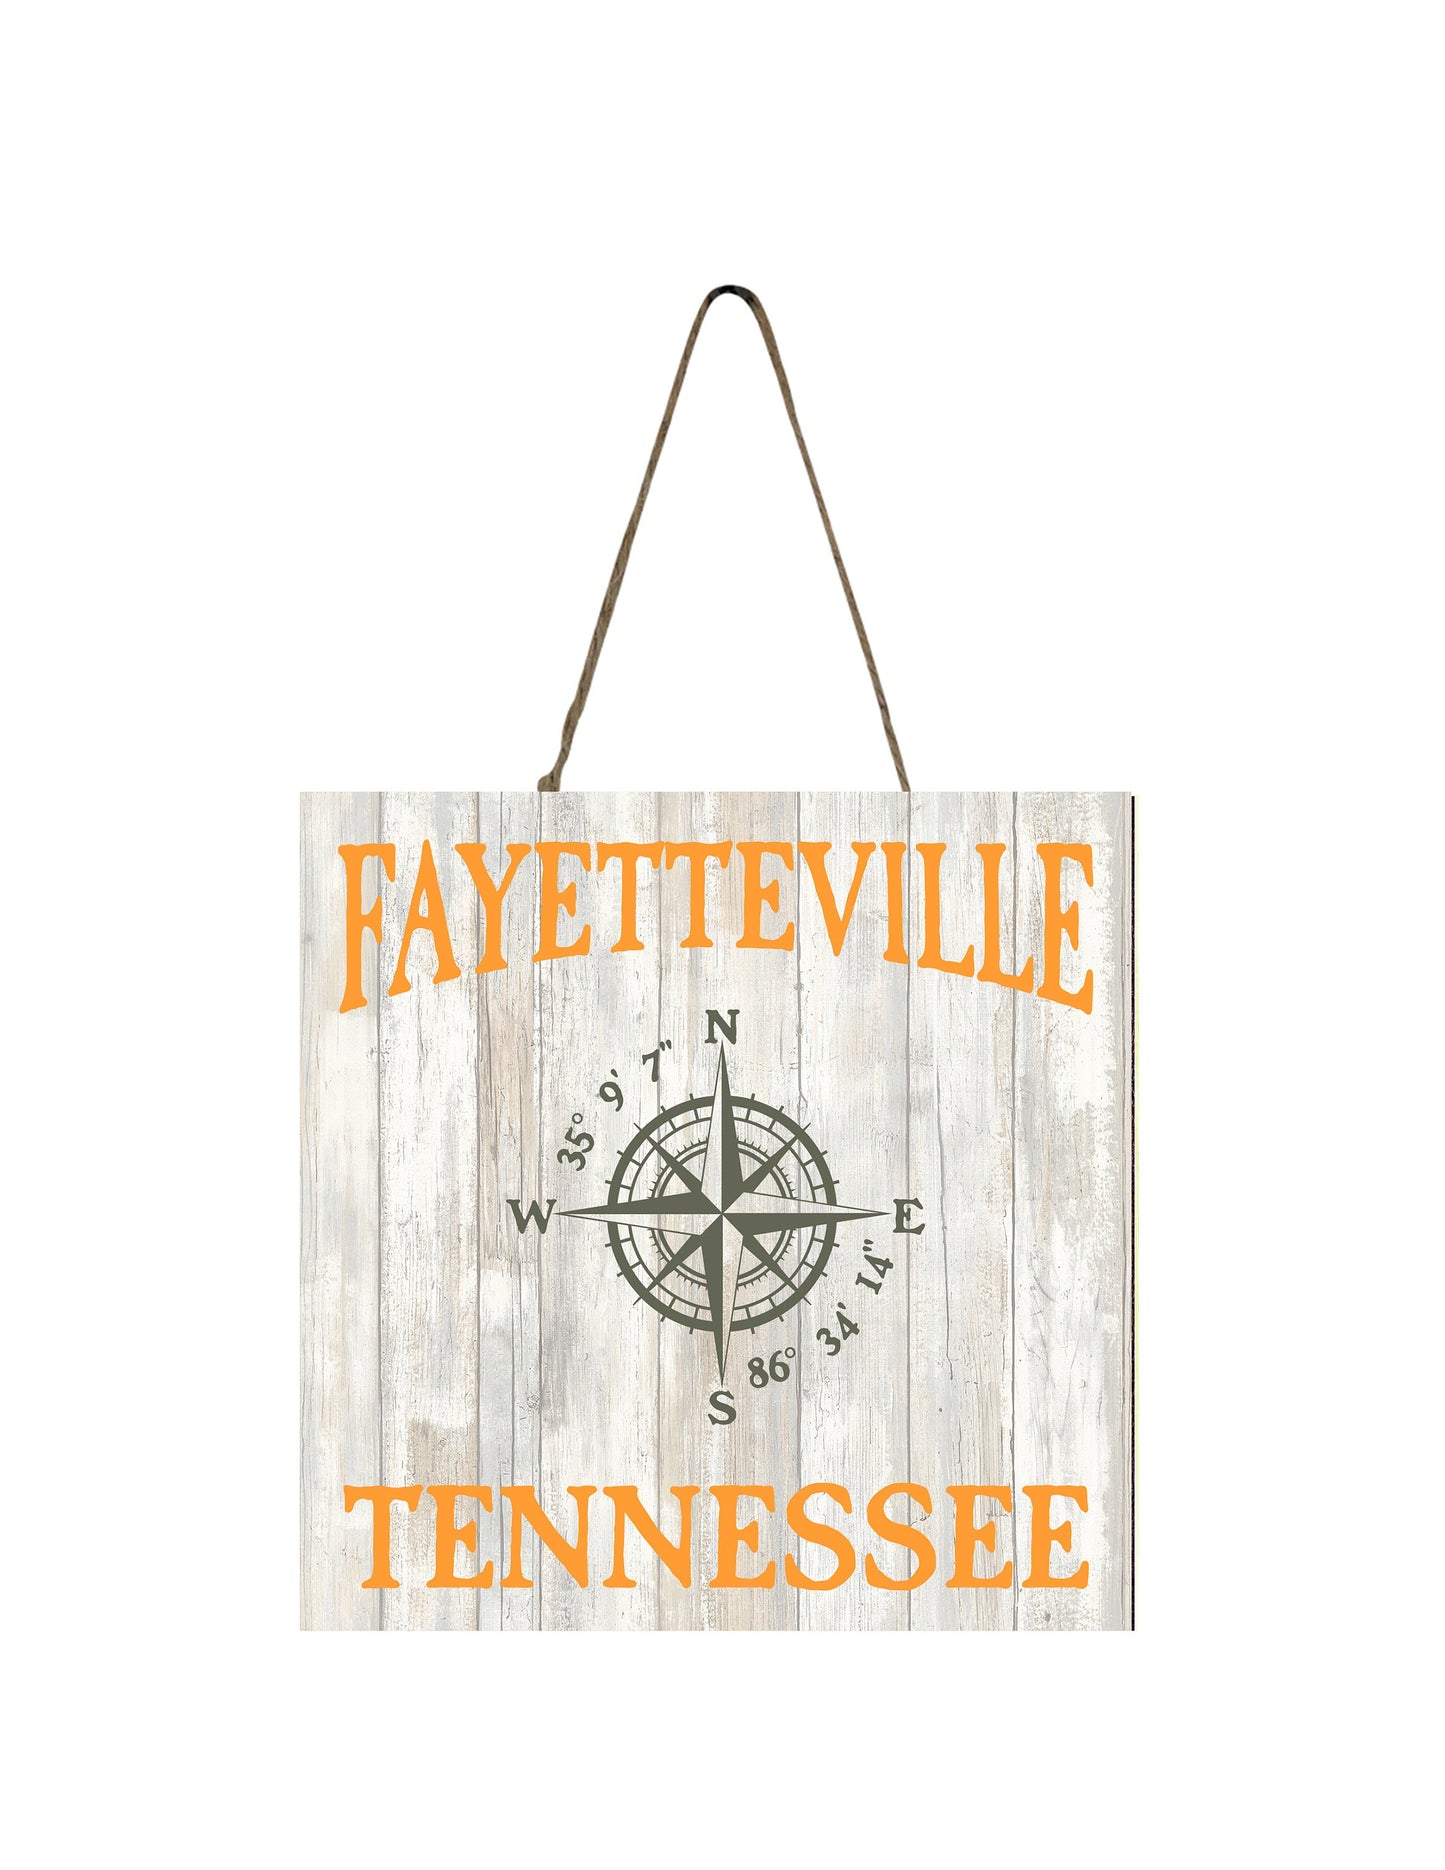 Fayetteville, Tennessee  Printed Handmade Wood Mini Sign